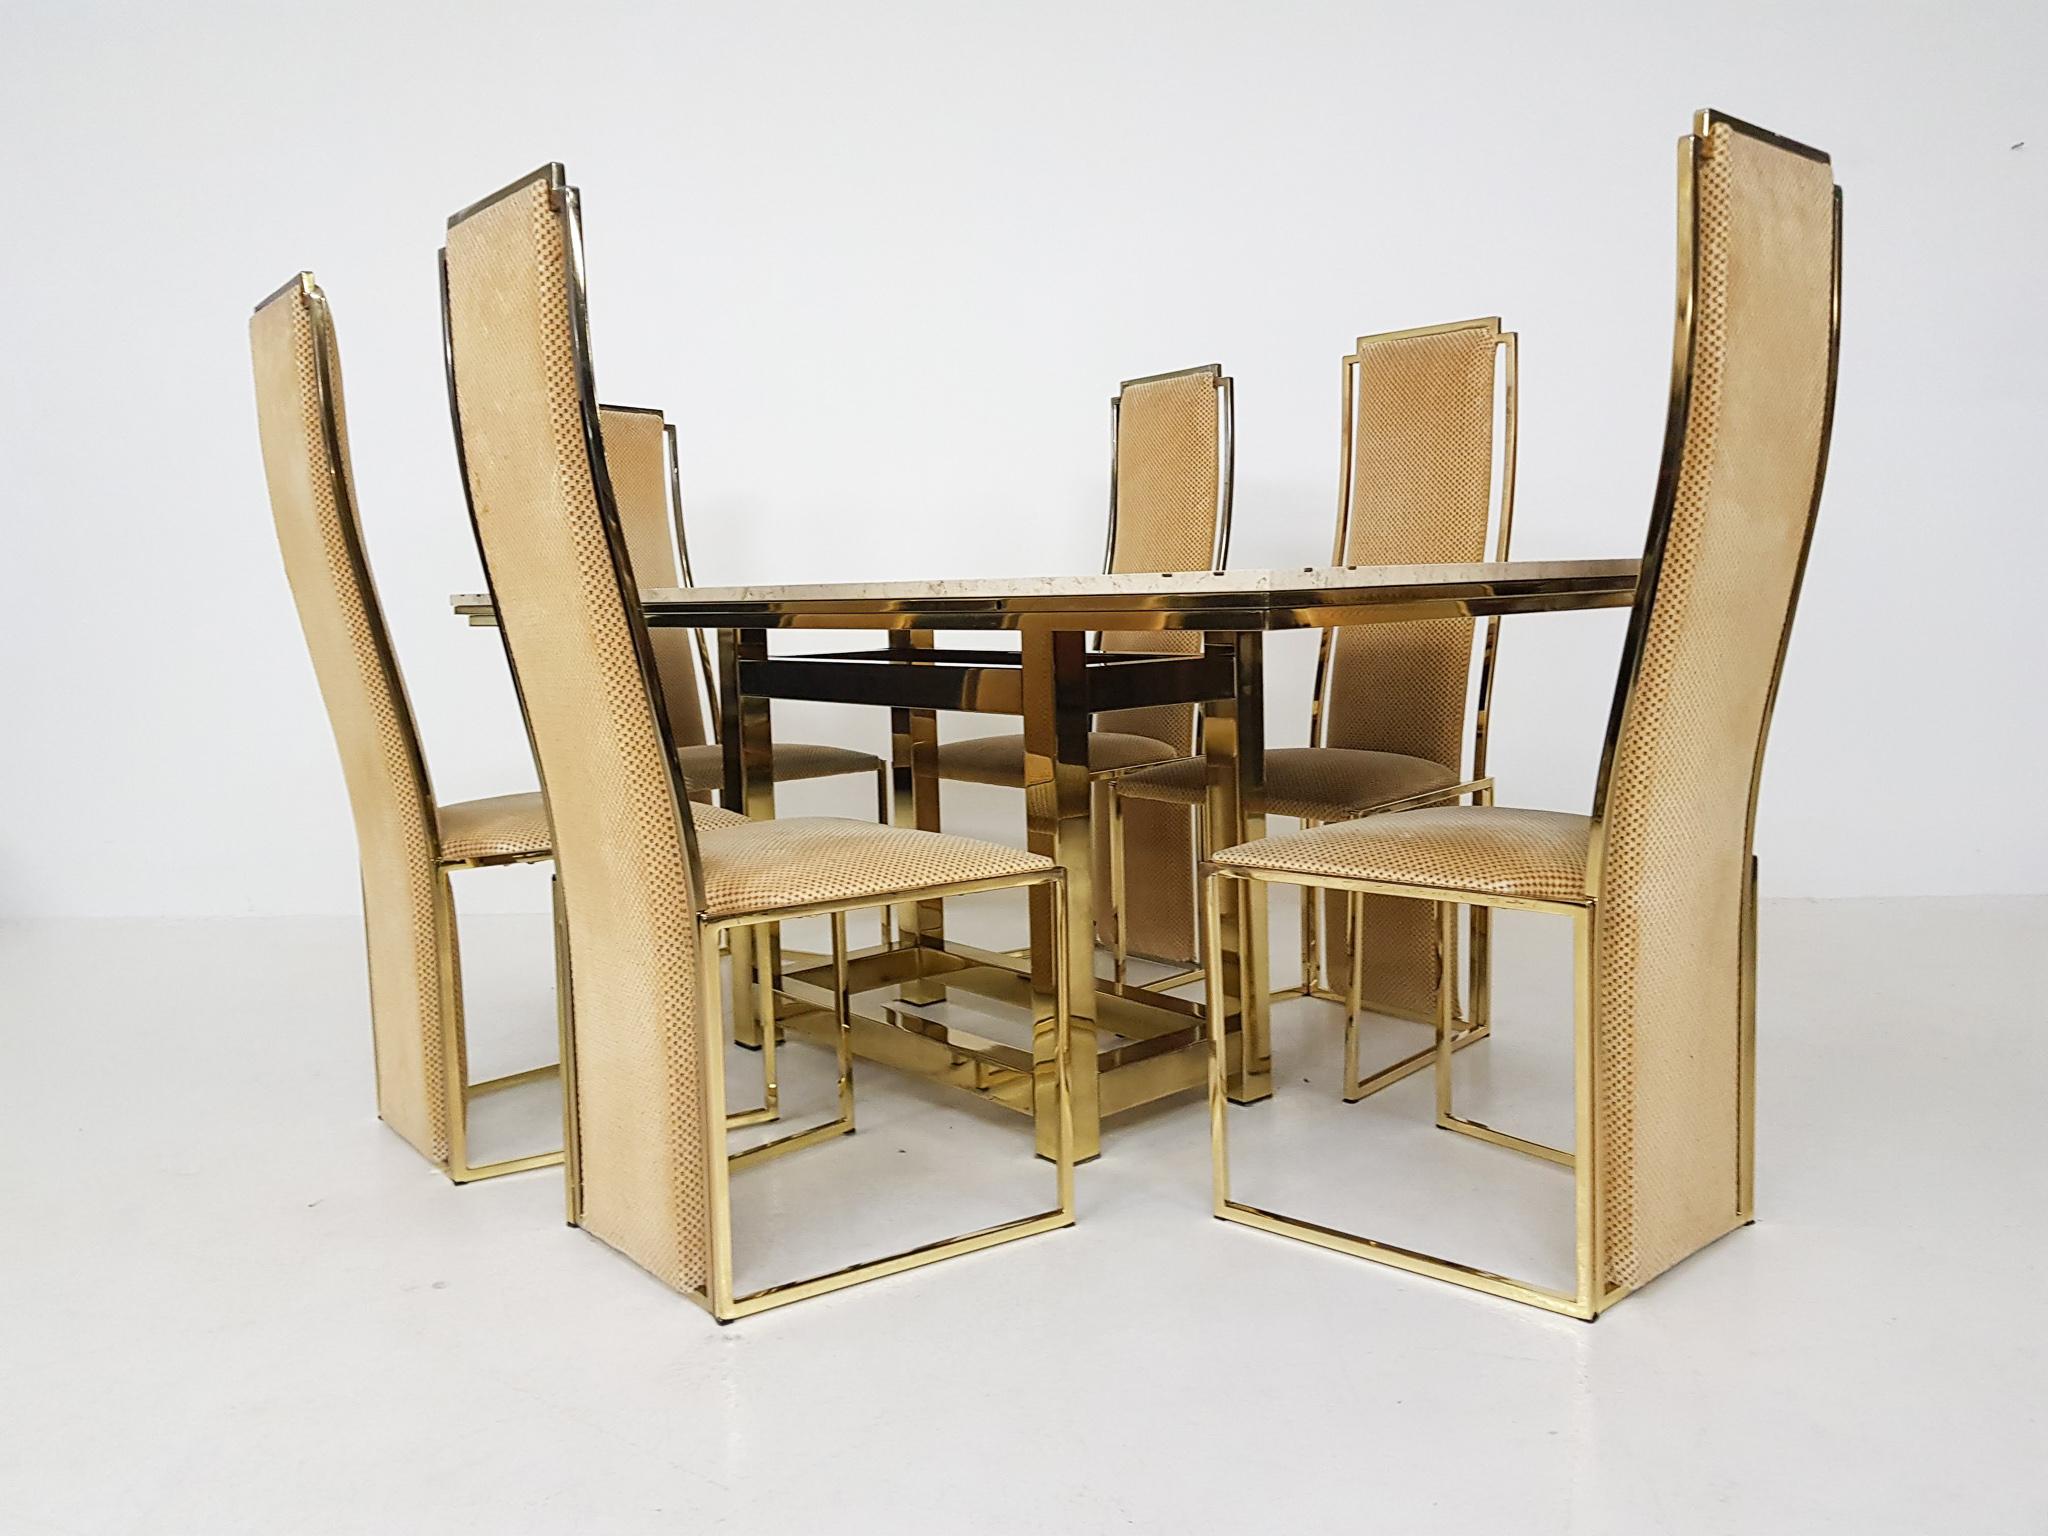 French Alain Delon Travertine, Brass and Gold Dining Set, France, 1980s For Sale